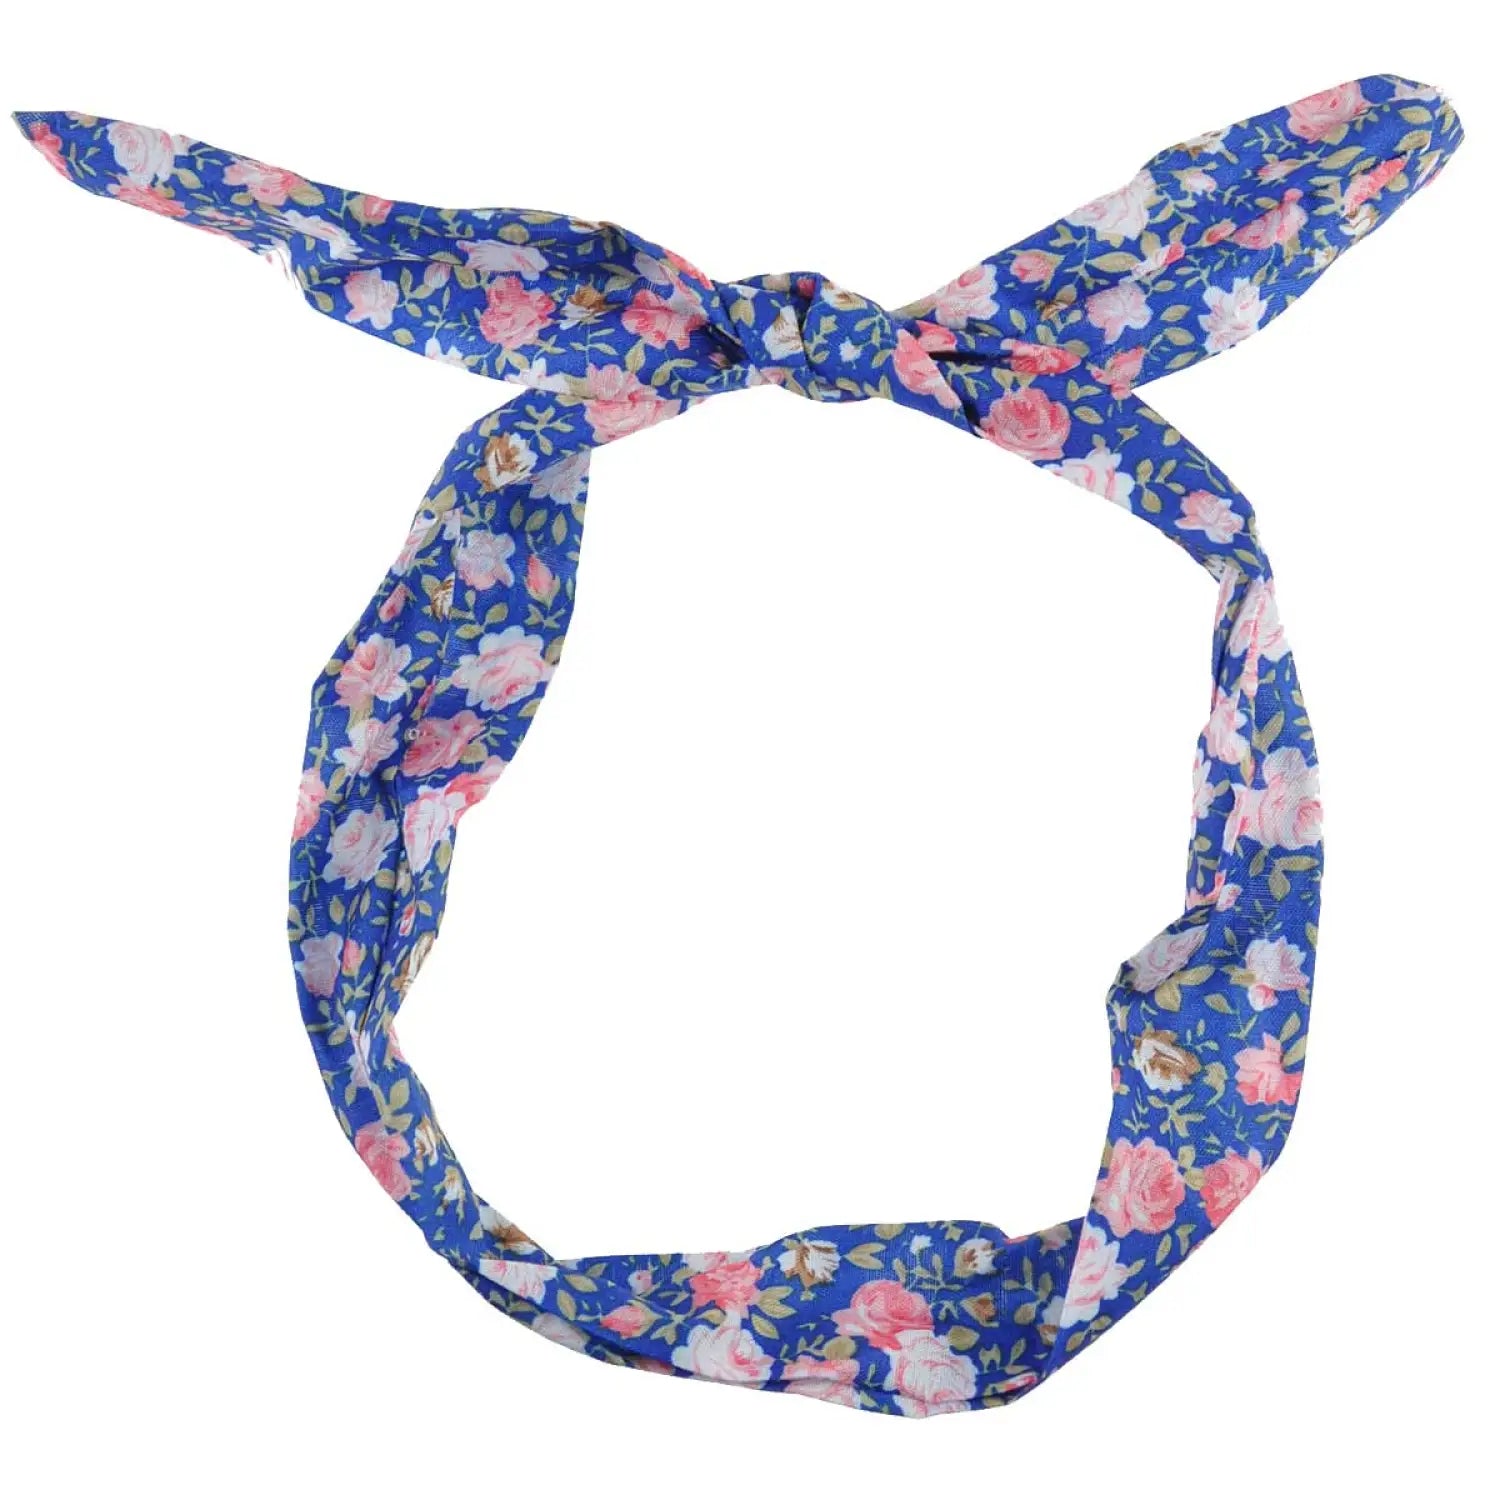 Blue floral headband featuring retro rose print and bunny ears.